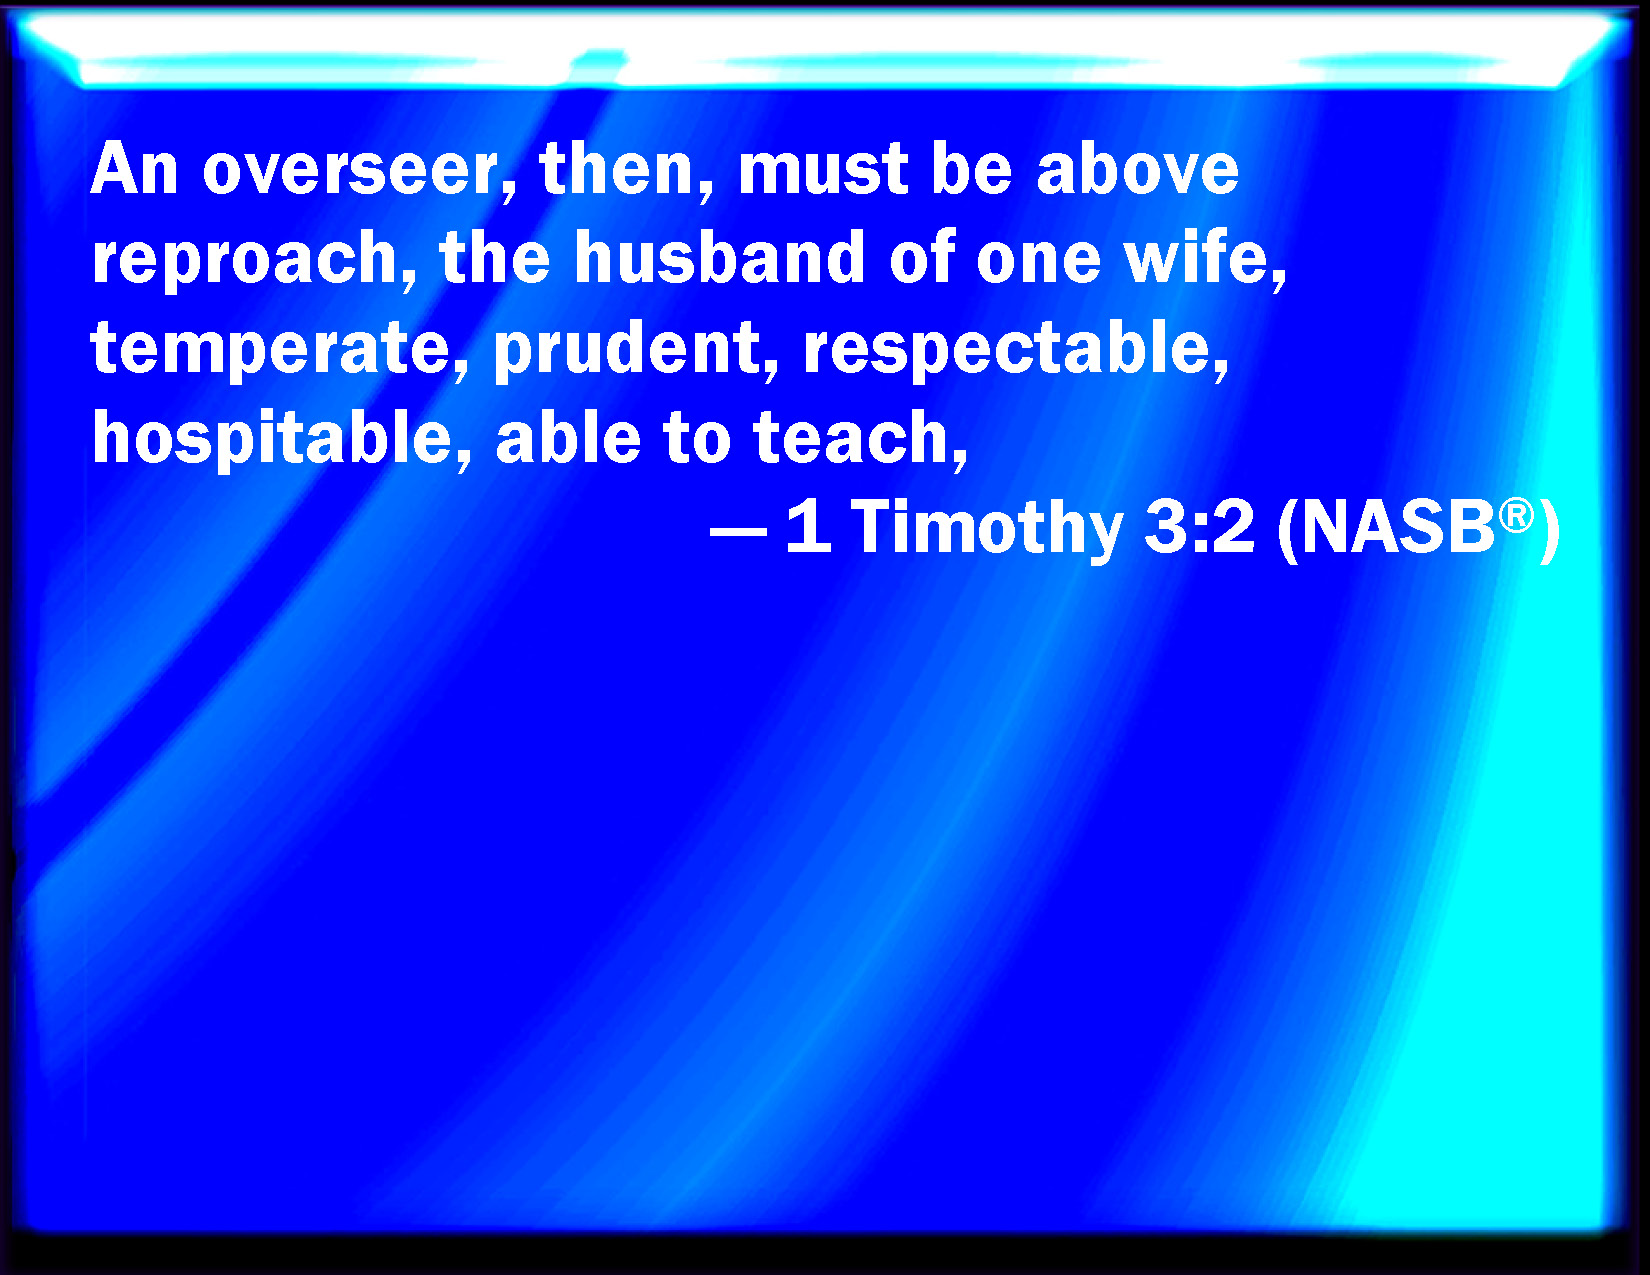 1 Timothy 32 A then must be blameless, the husband